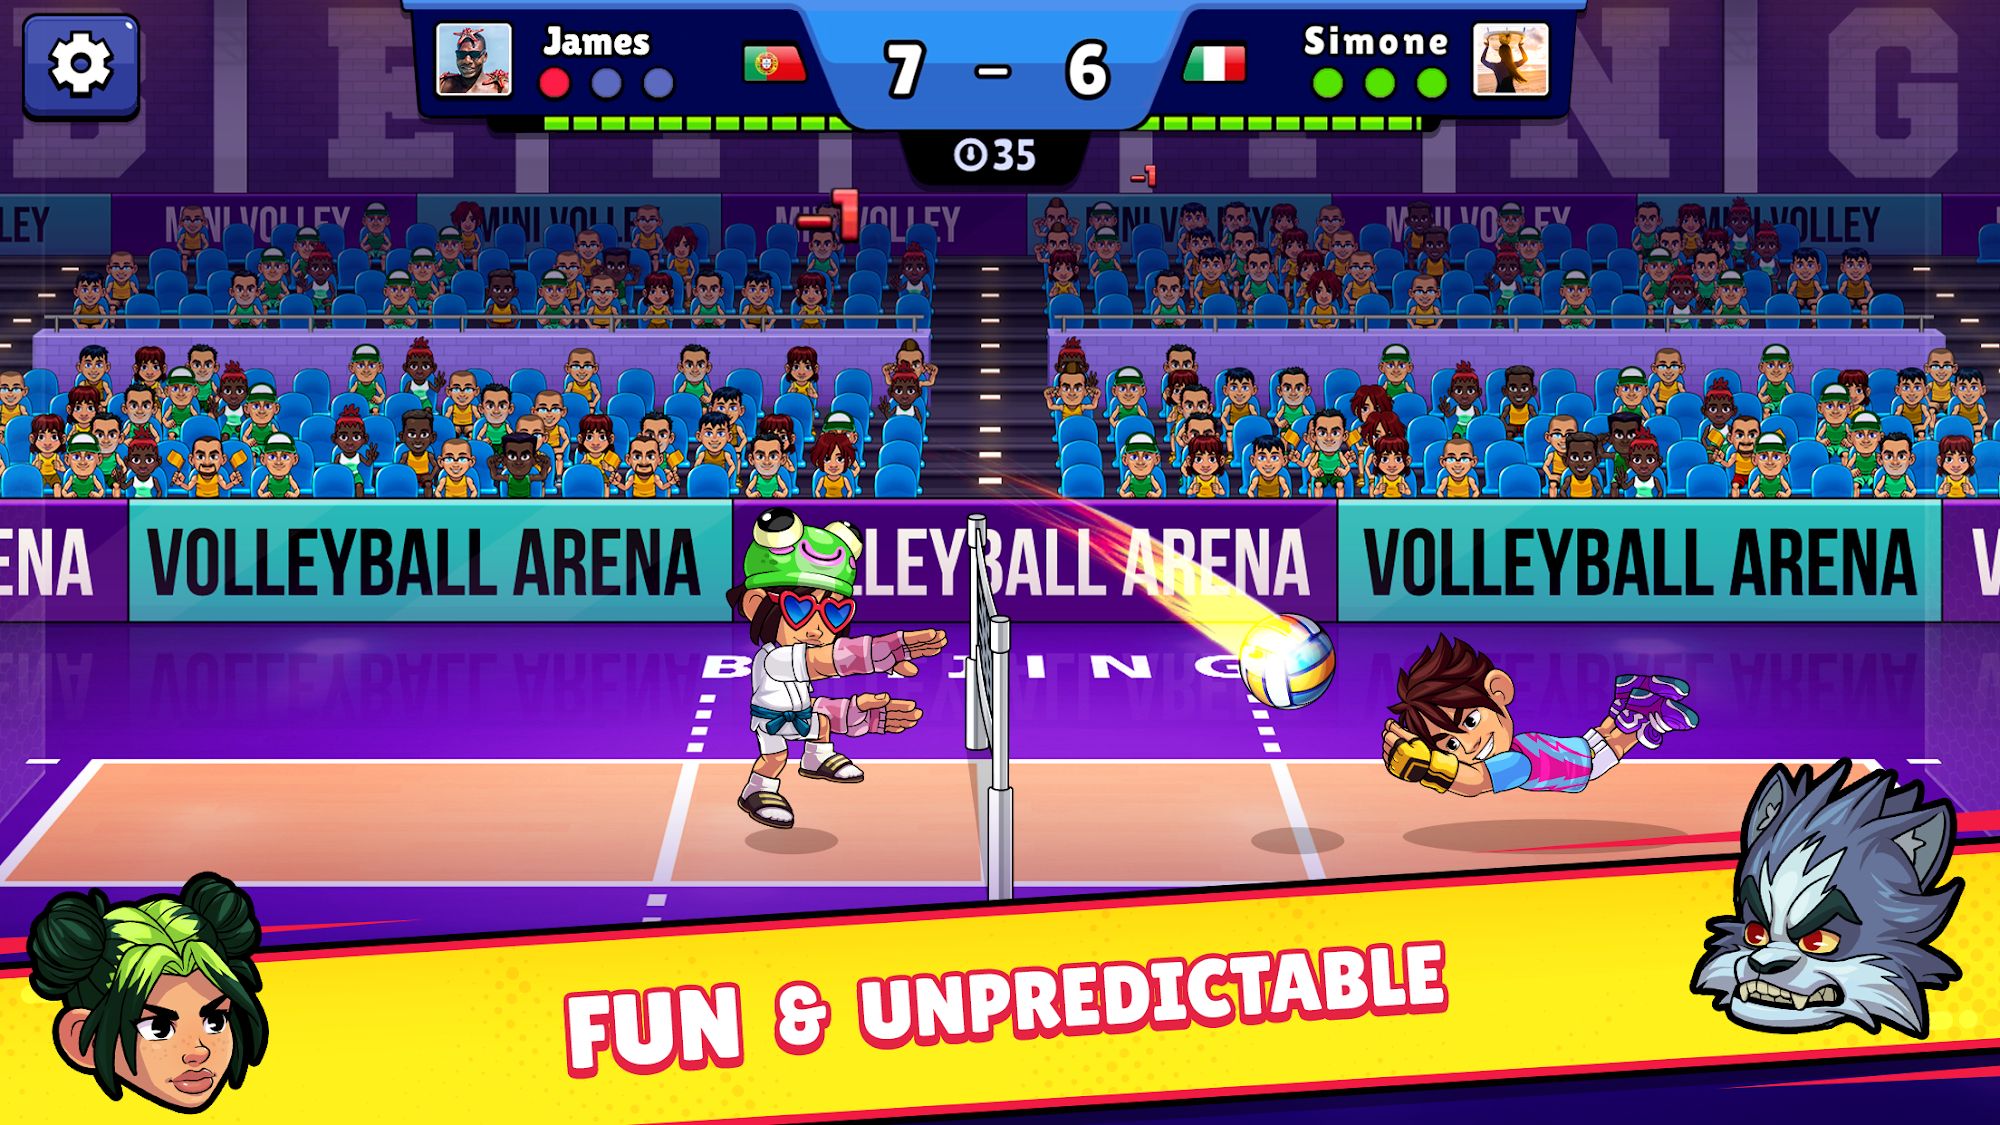 Télécharger Volleyball Arena pour Android gratuit.